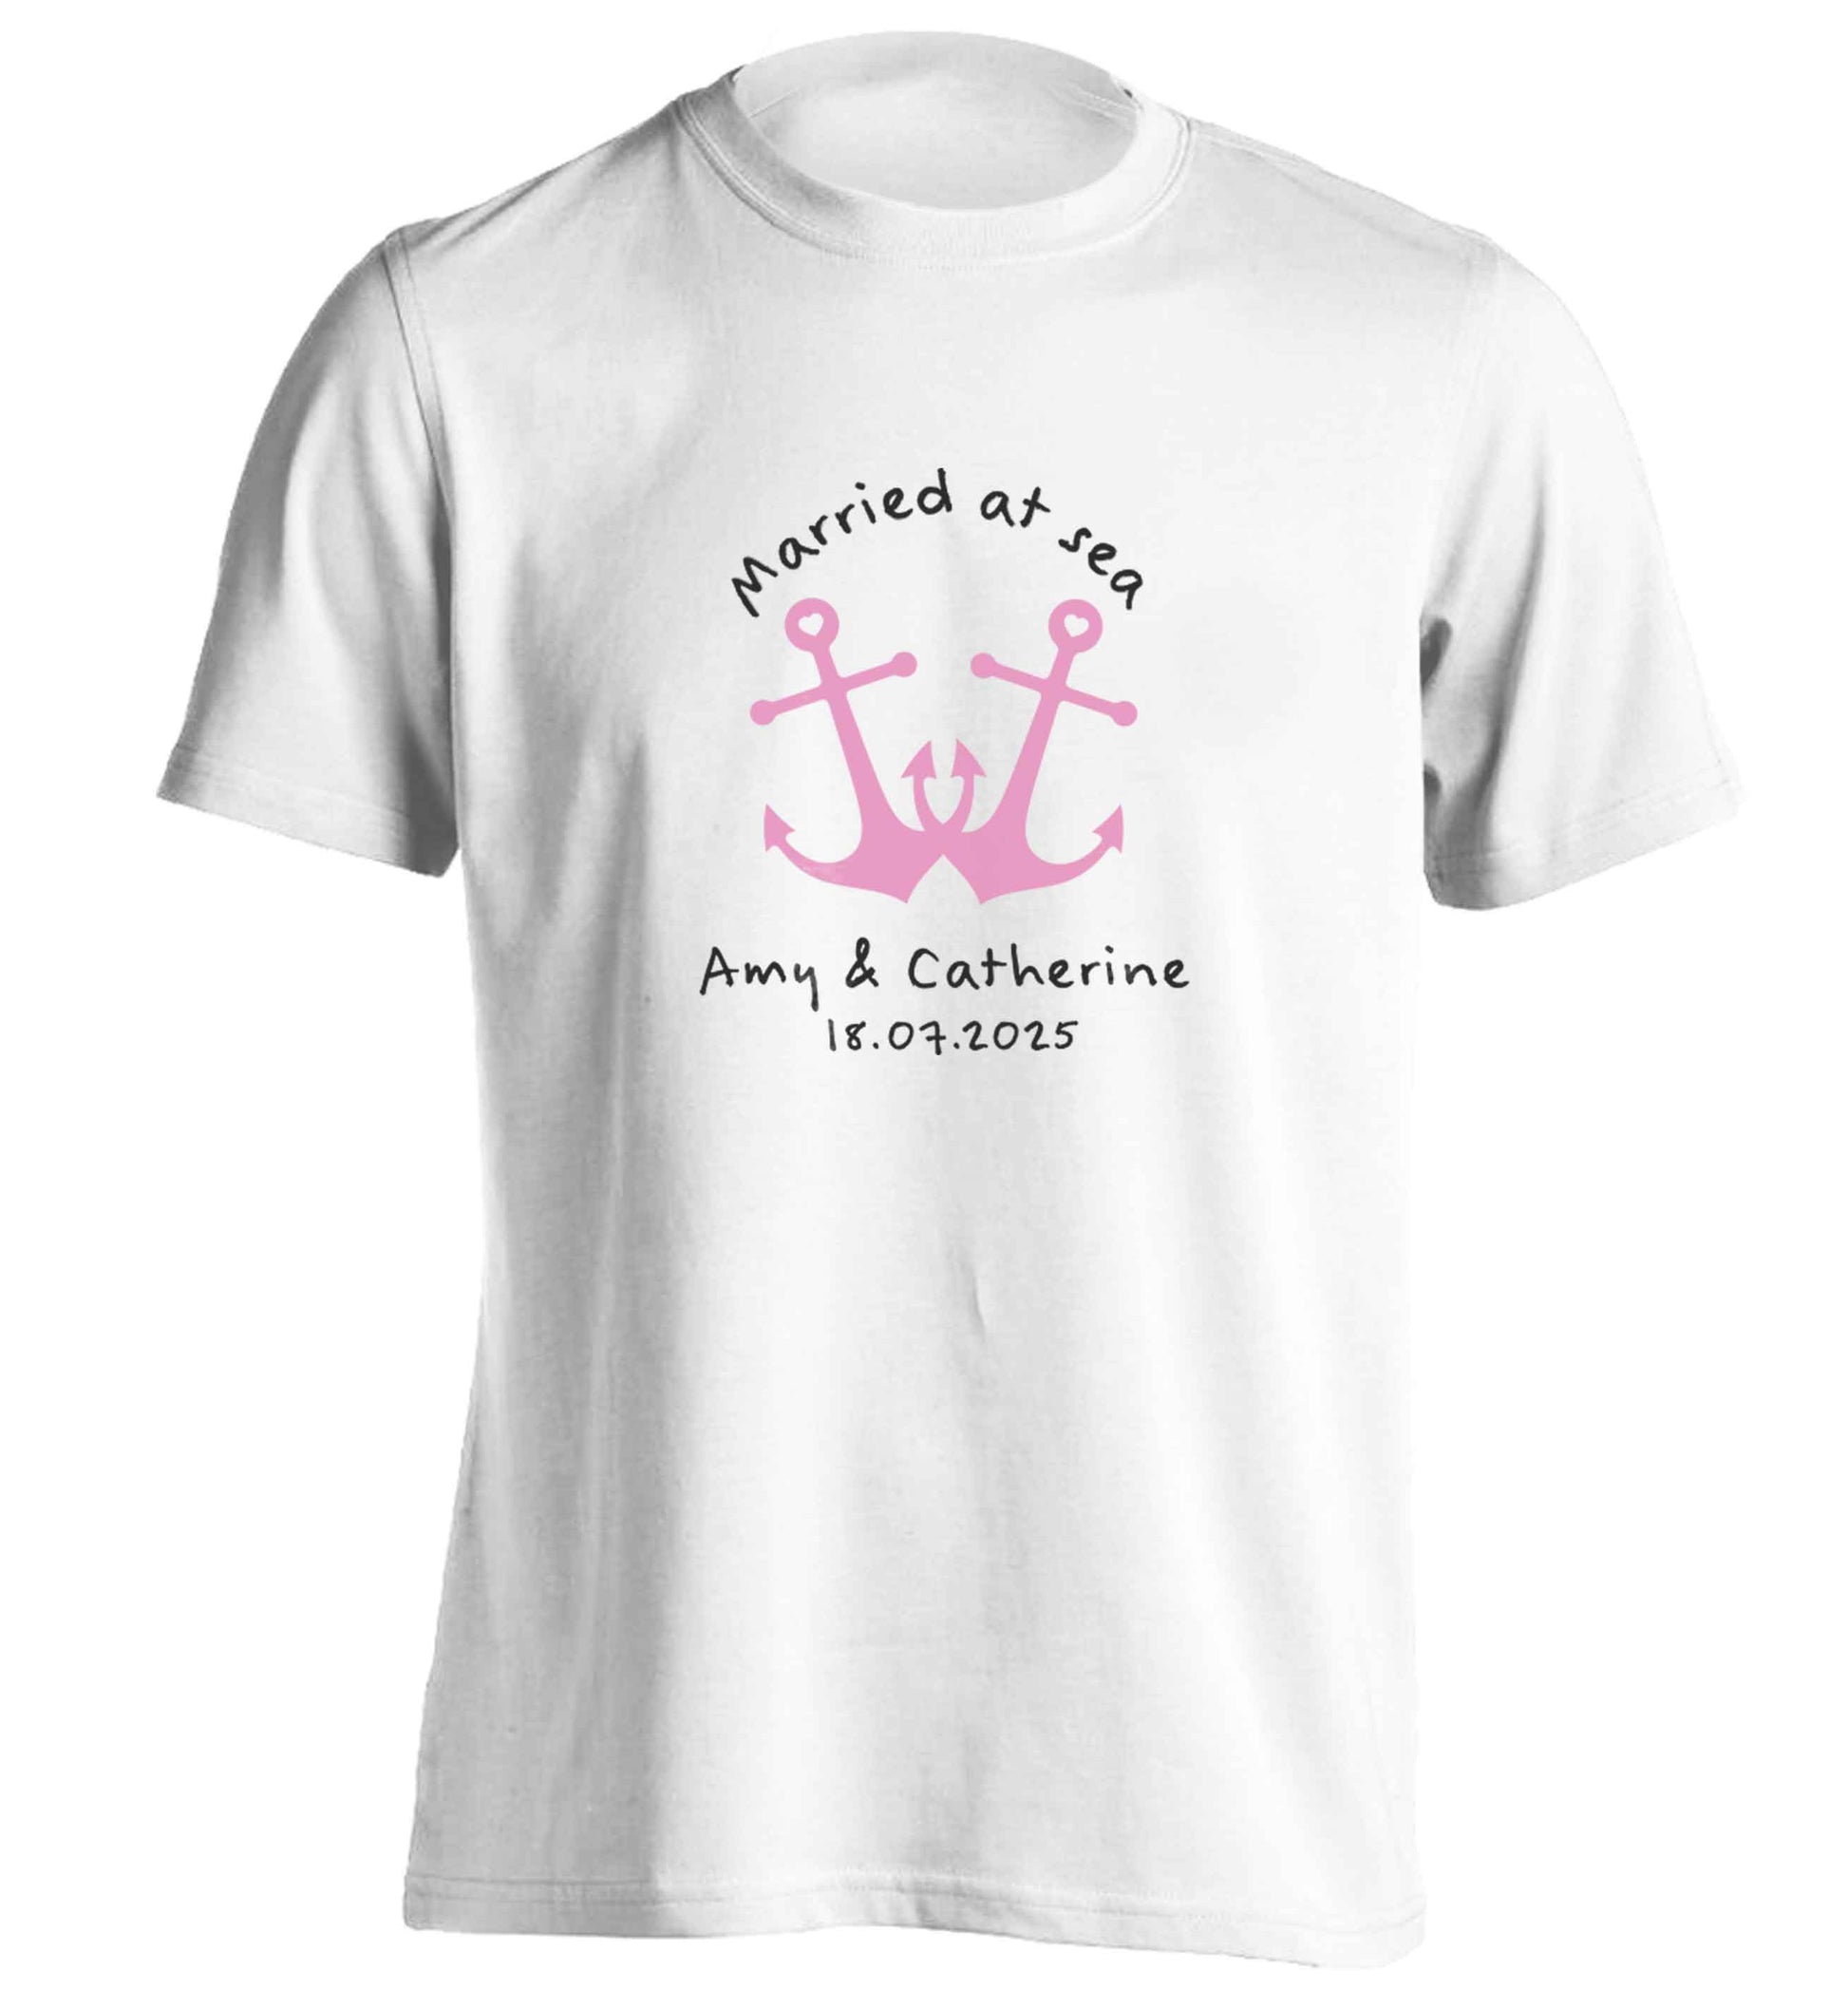 Married at sea pink anchors adults unisex white Tshirt 2XL